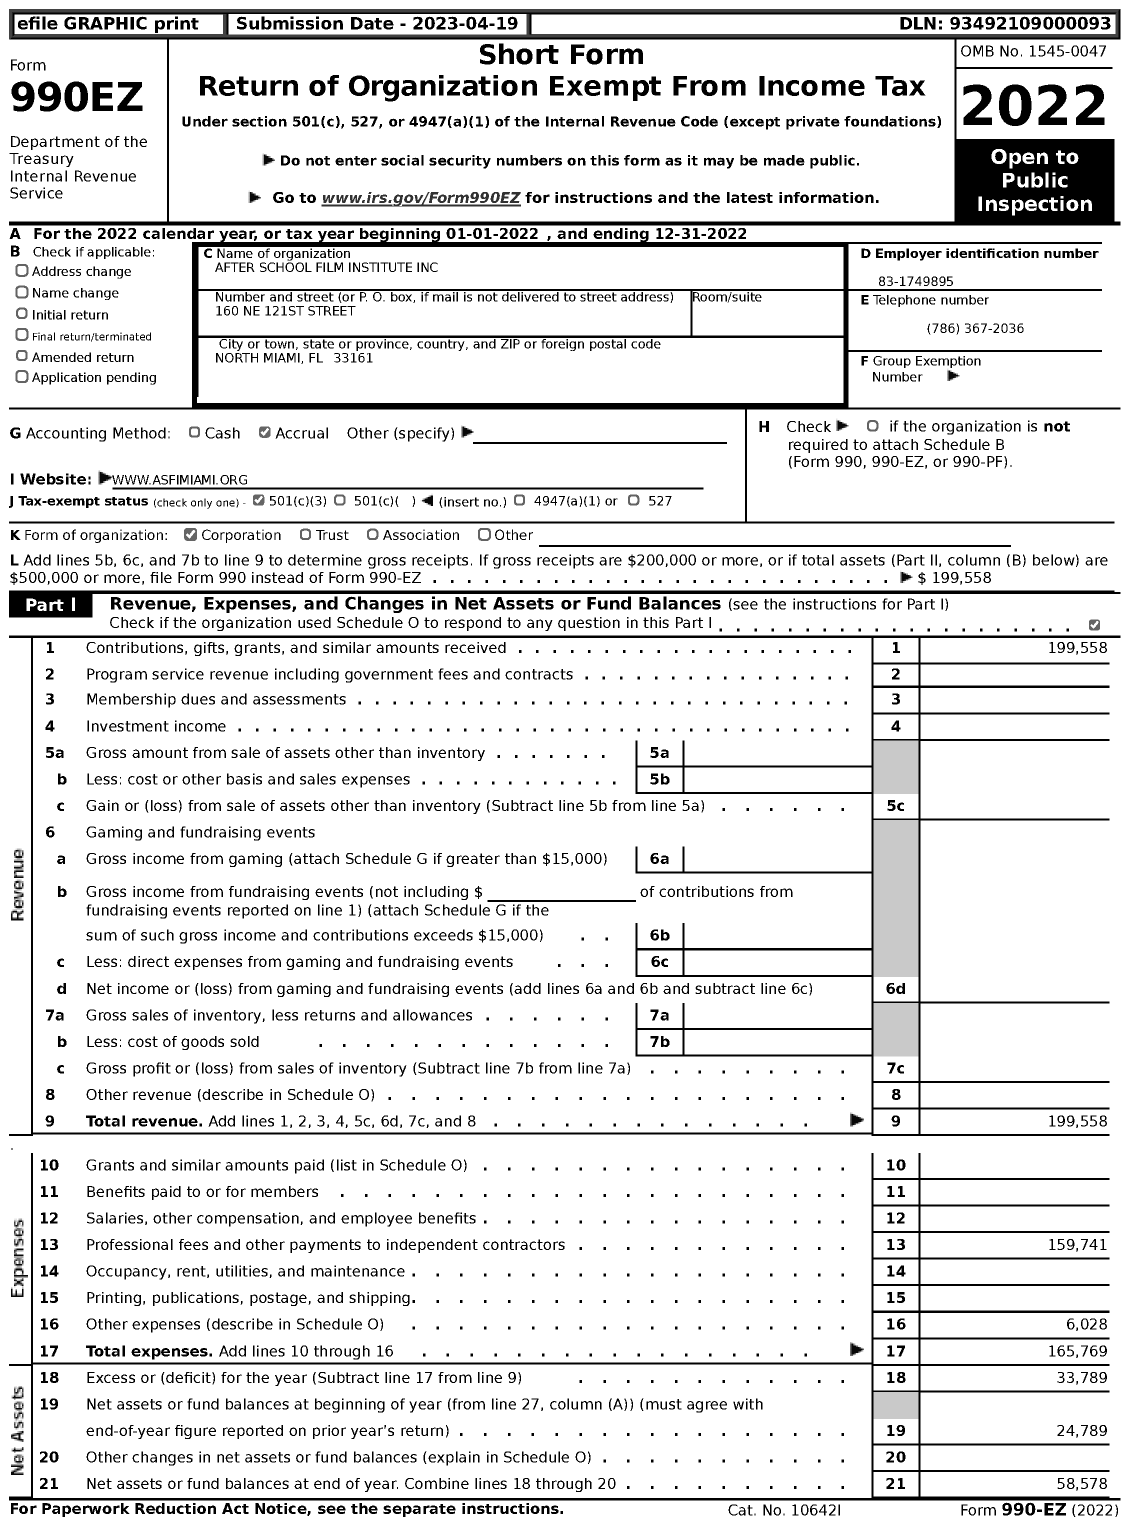 Image of first page of 2022 Form 990EZ for After School Film Institute